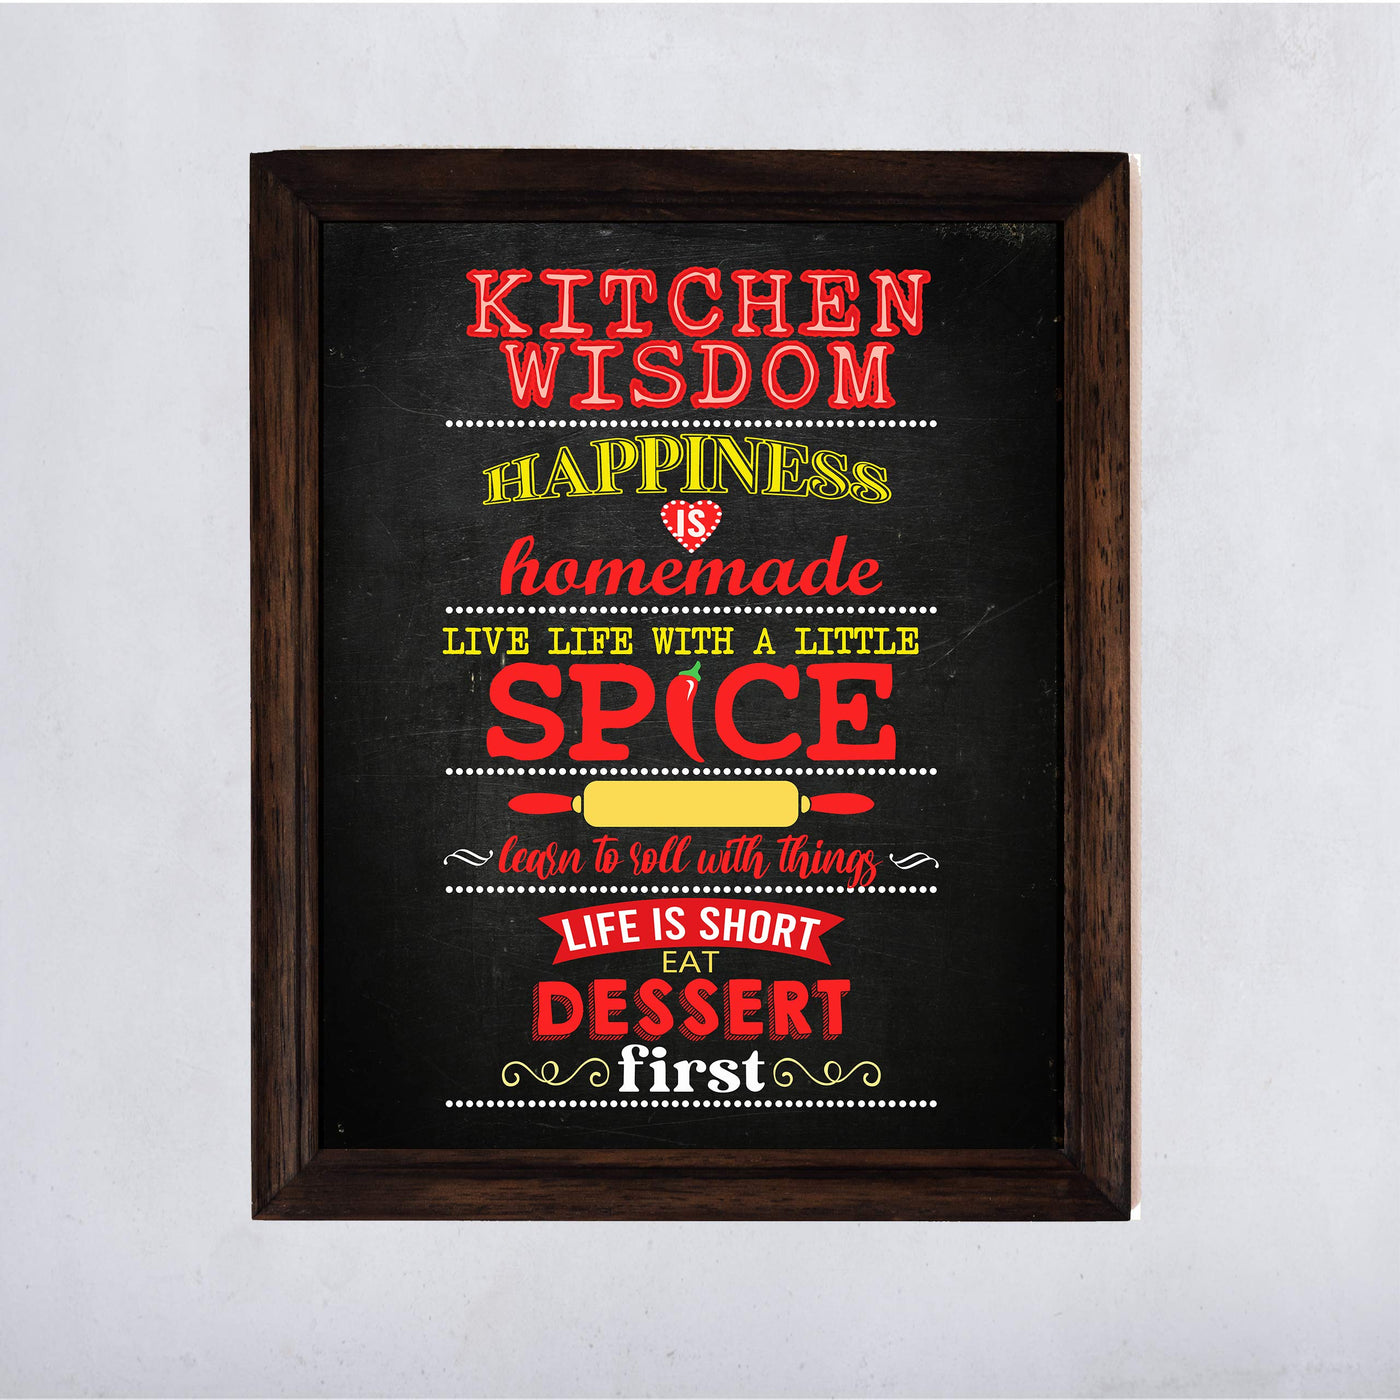 Kitchen Wisdom Funny Kitchen Sign -11 x 14" Rustic Farmhouse Wall Art Print-Ready to Frame. Typographic Design. Humorous Home-Kitchen-Dining Room Decor. Fun, Inspirational Life Lessons. Great Gift!